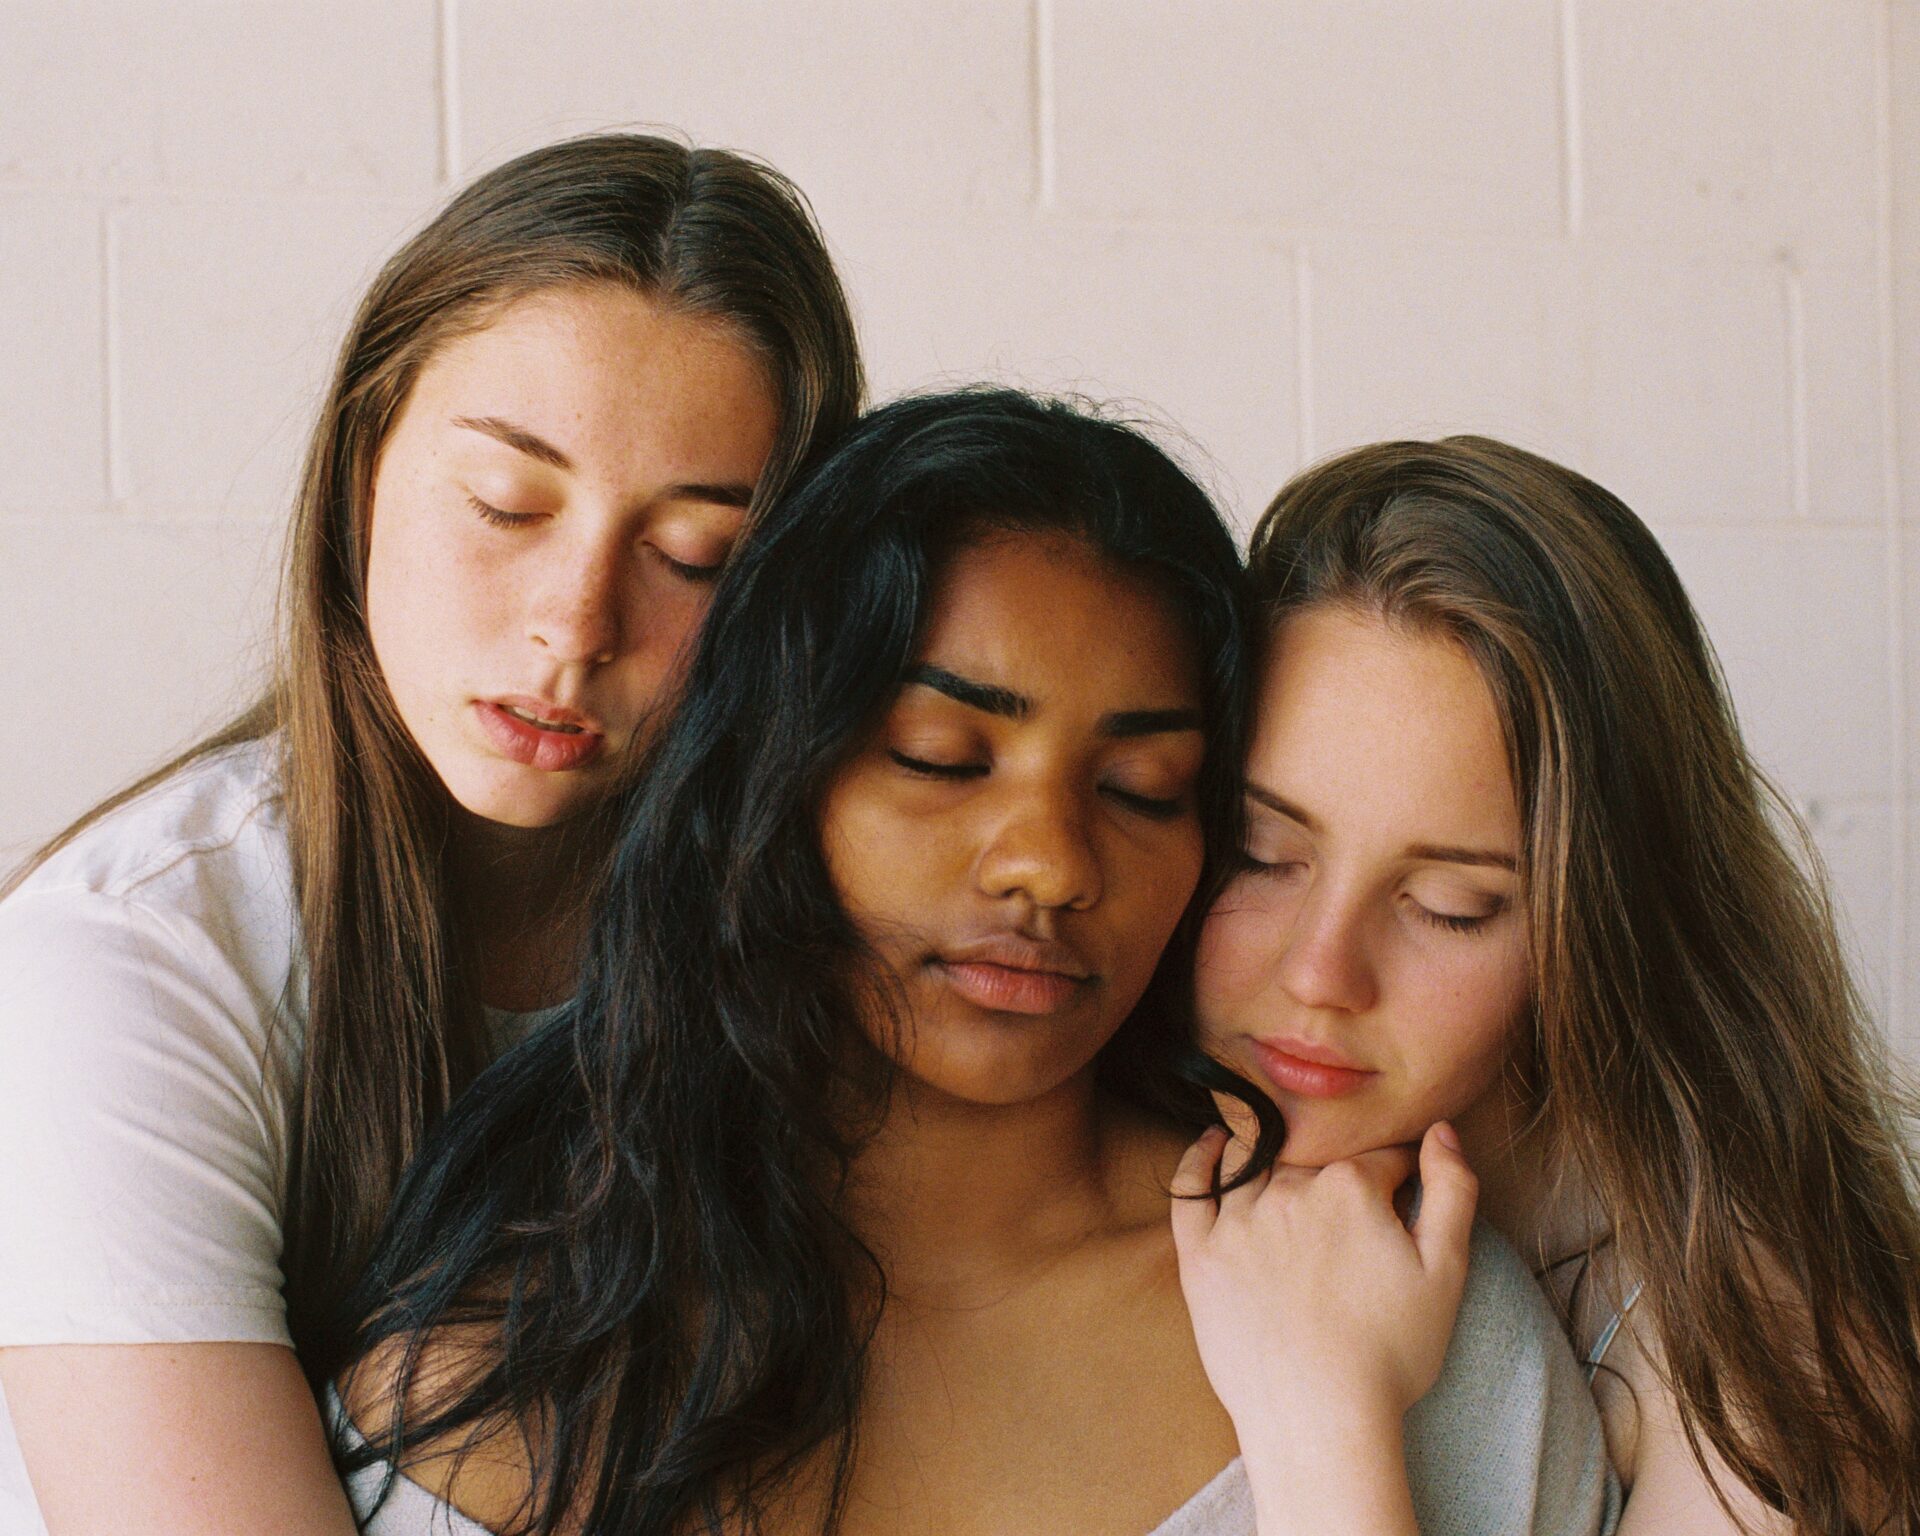 three girls hold eachother in a group hug with their eyes closed, they seem content.